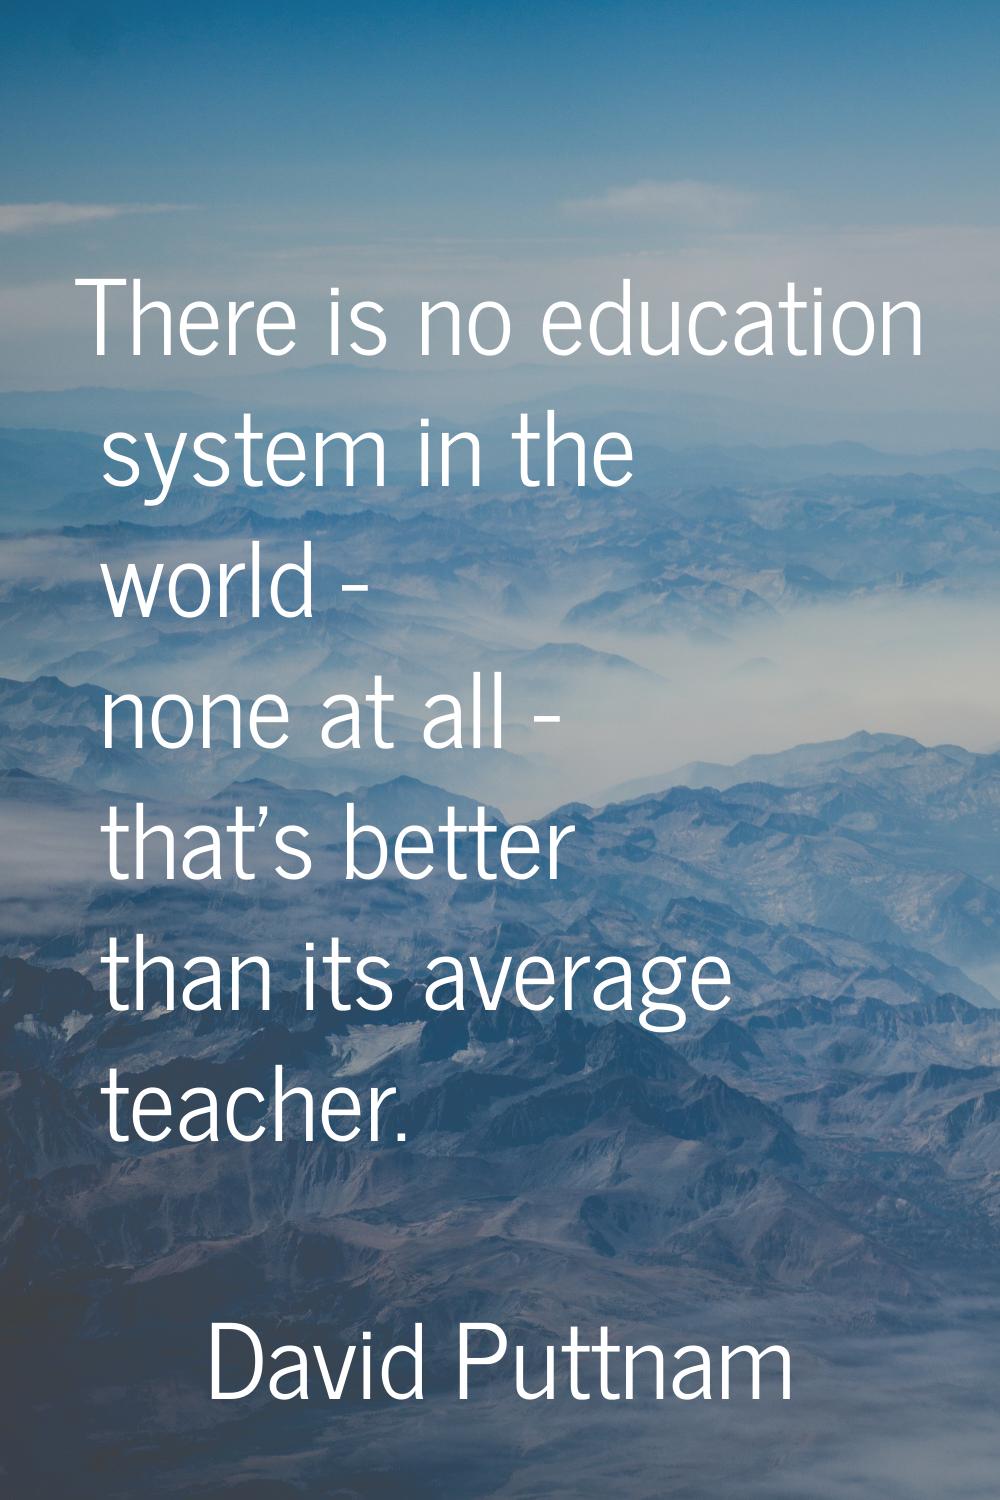 There is no education system in the world - none at all - that's better than its average teacher.